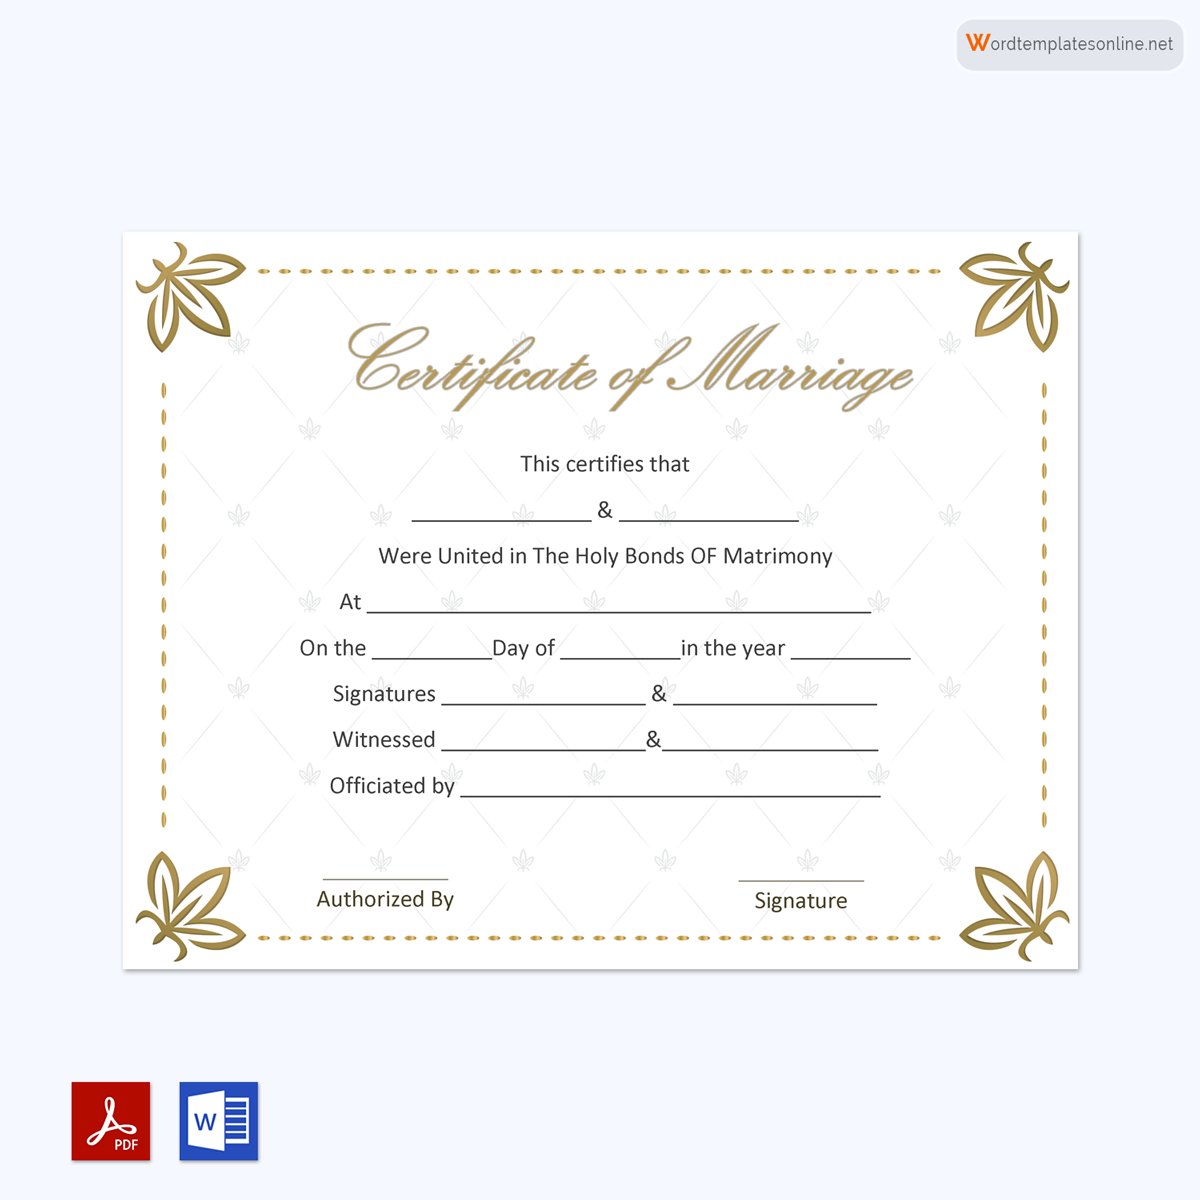 Personalized Marriage Certificate Example